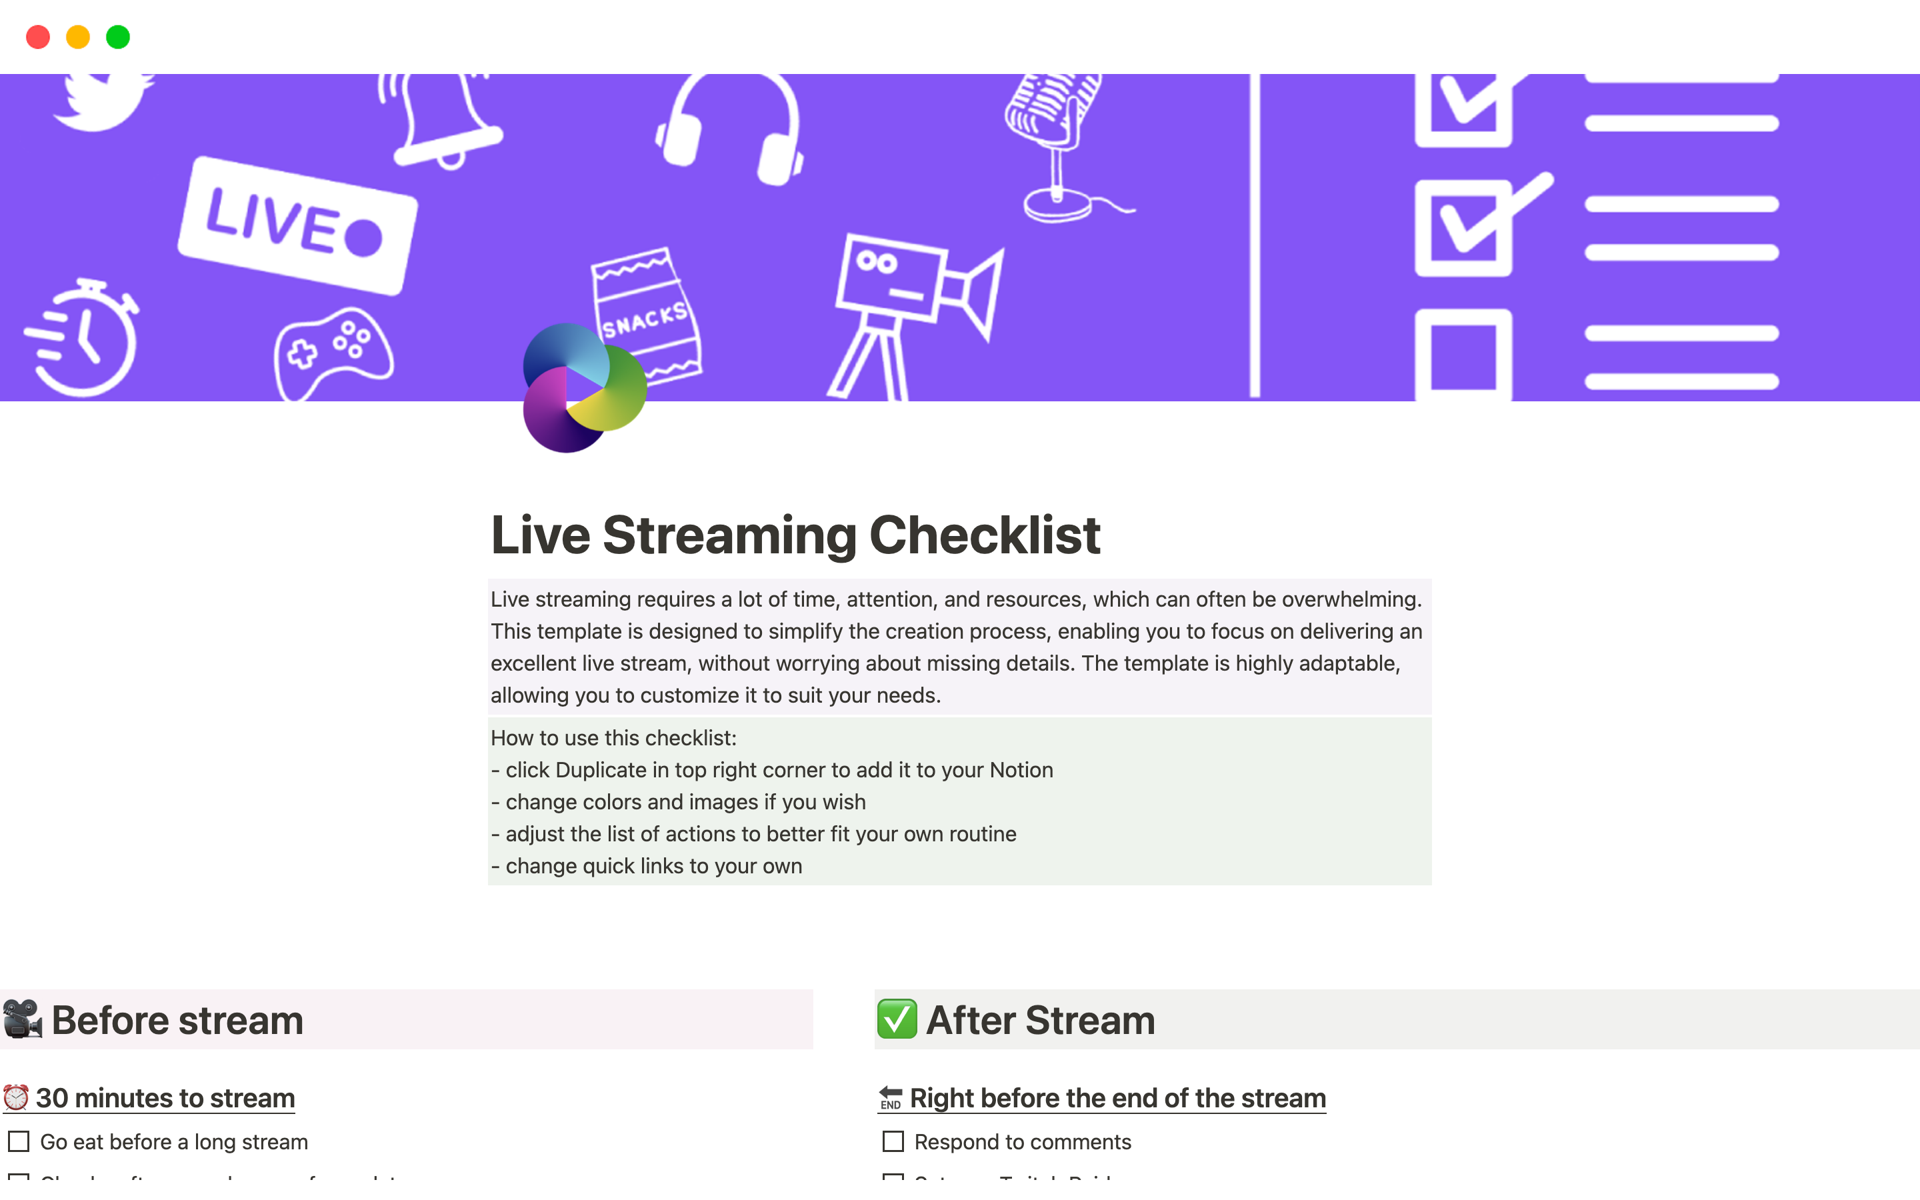 This live streaming checklist offers a complete guide for streamers, it includes pre-stream preparations like setting goals, planning stream activities, and promoting on social media after the stream